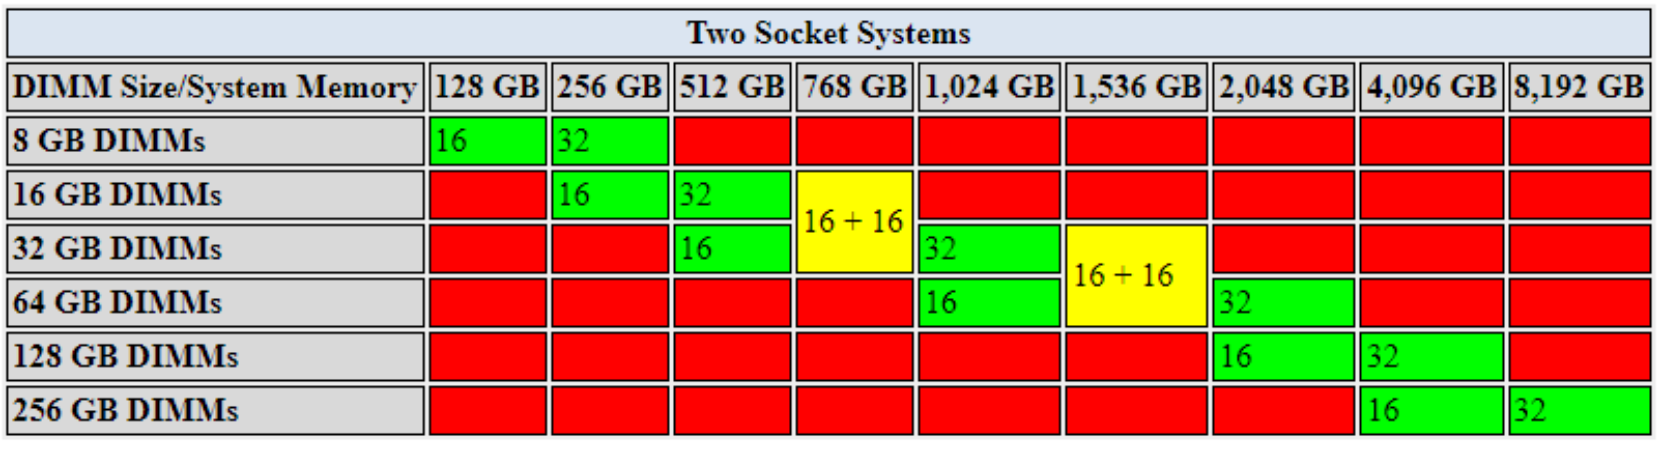 Table showing the supported DIMM/memory configuration for two-socket 3rd Generation servers